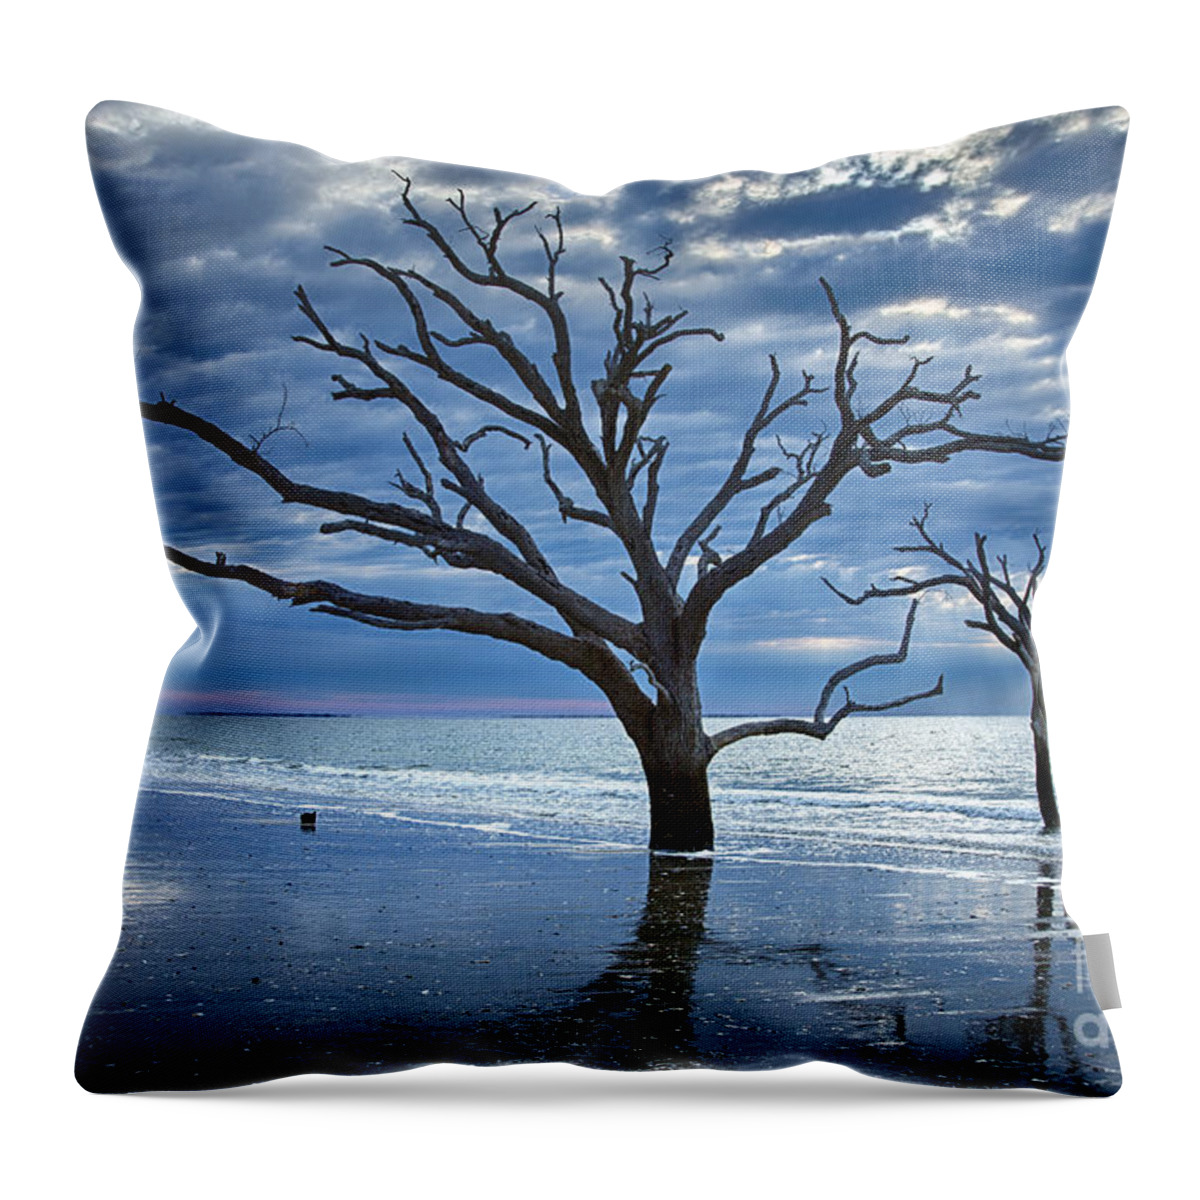 Botany Bay Throw Pillow featuring the photograph Cloudy Morning Botany Bay by Carrie Cranwill